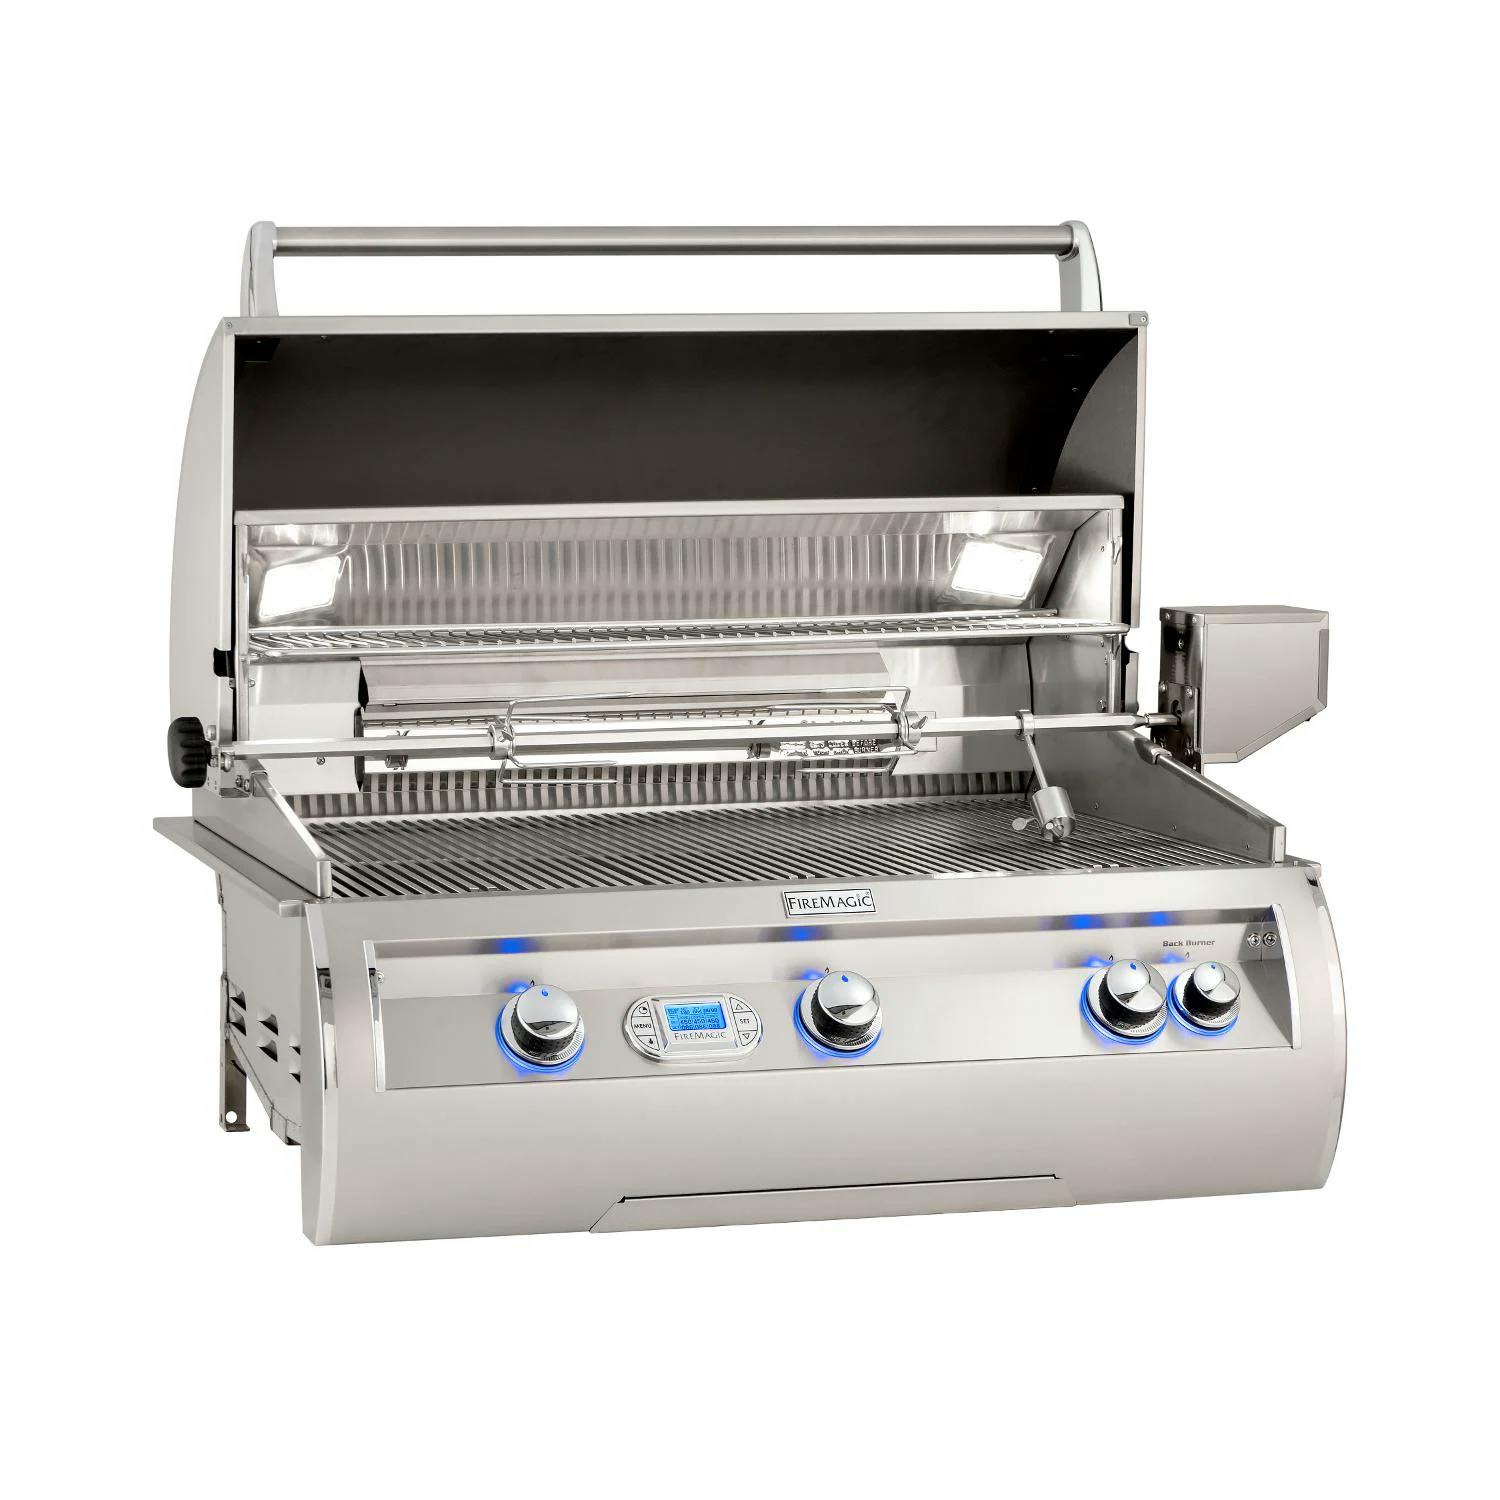 Fire Magic Echelon Diamond Built-in Gas Grill with One Infrared Burner, Rotisserie, and Digital Thermometer · 36 in. · Propane